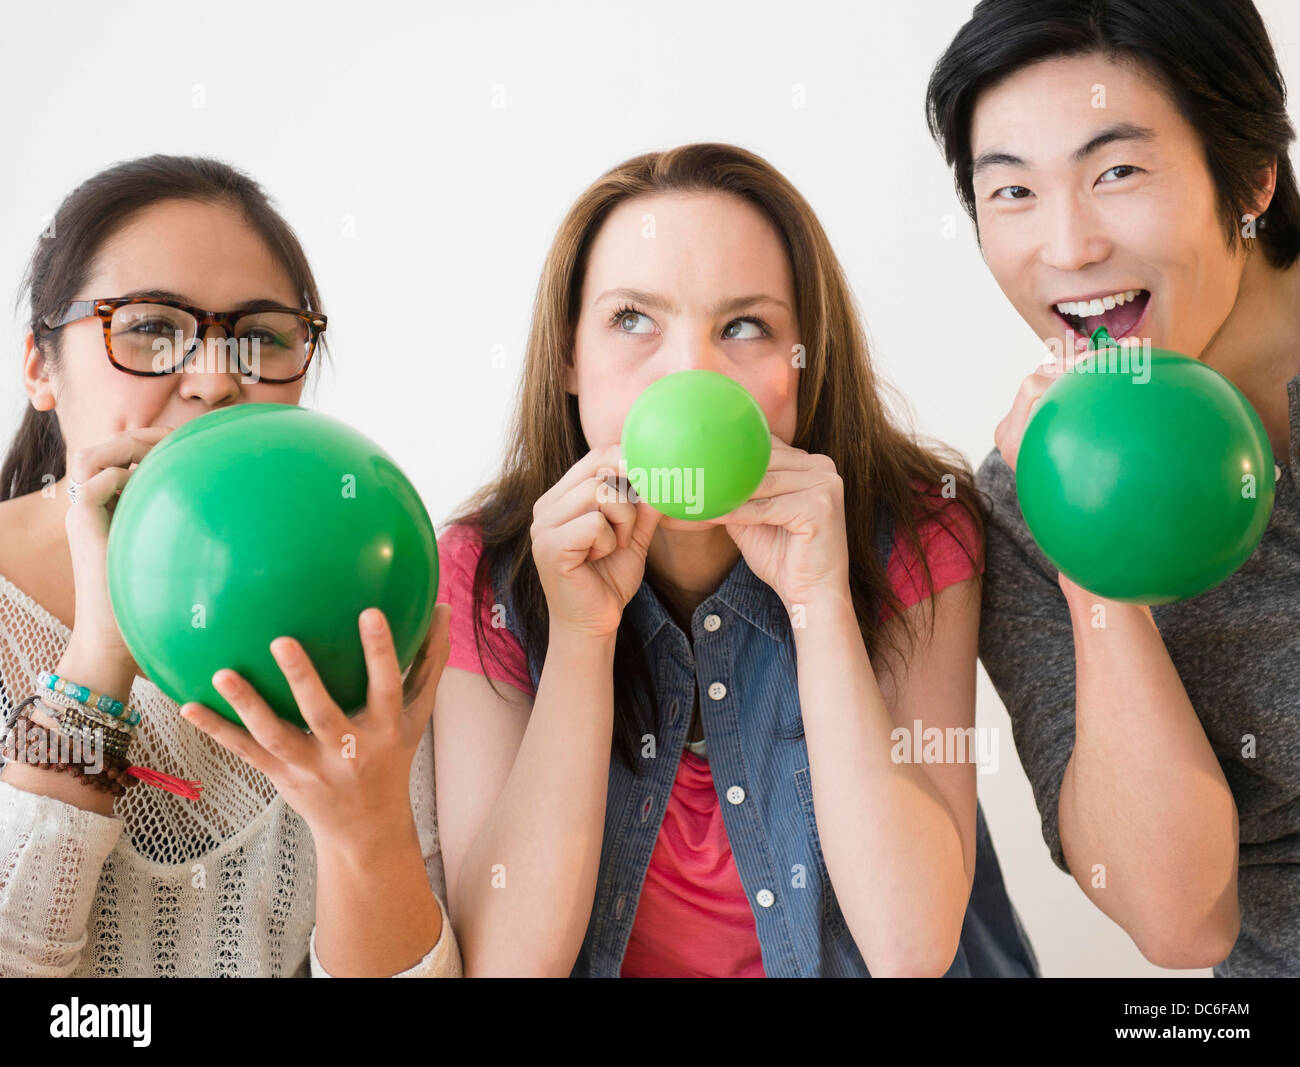 Portrait of young women and man blowing green balloons Stock Photo